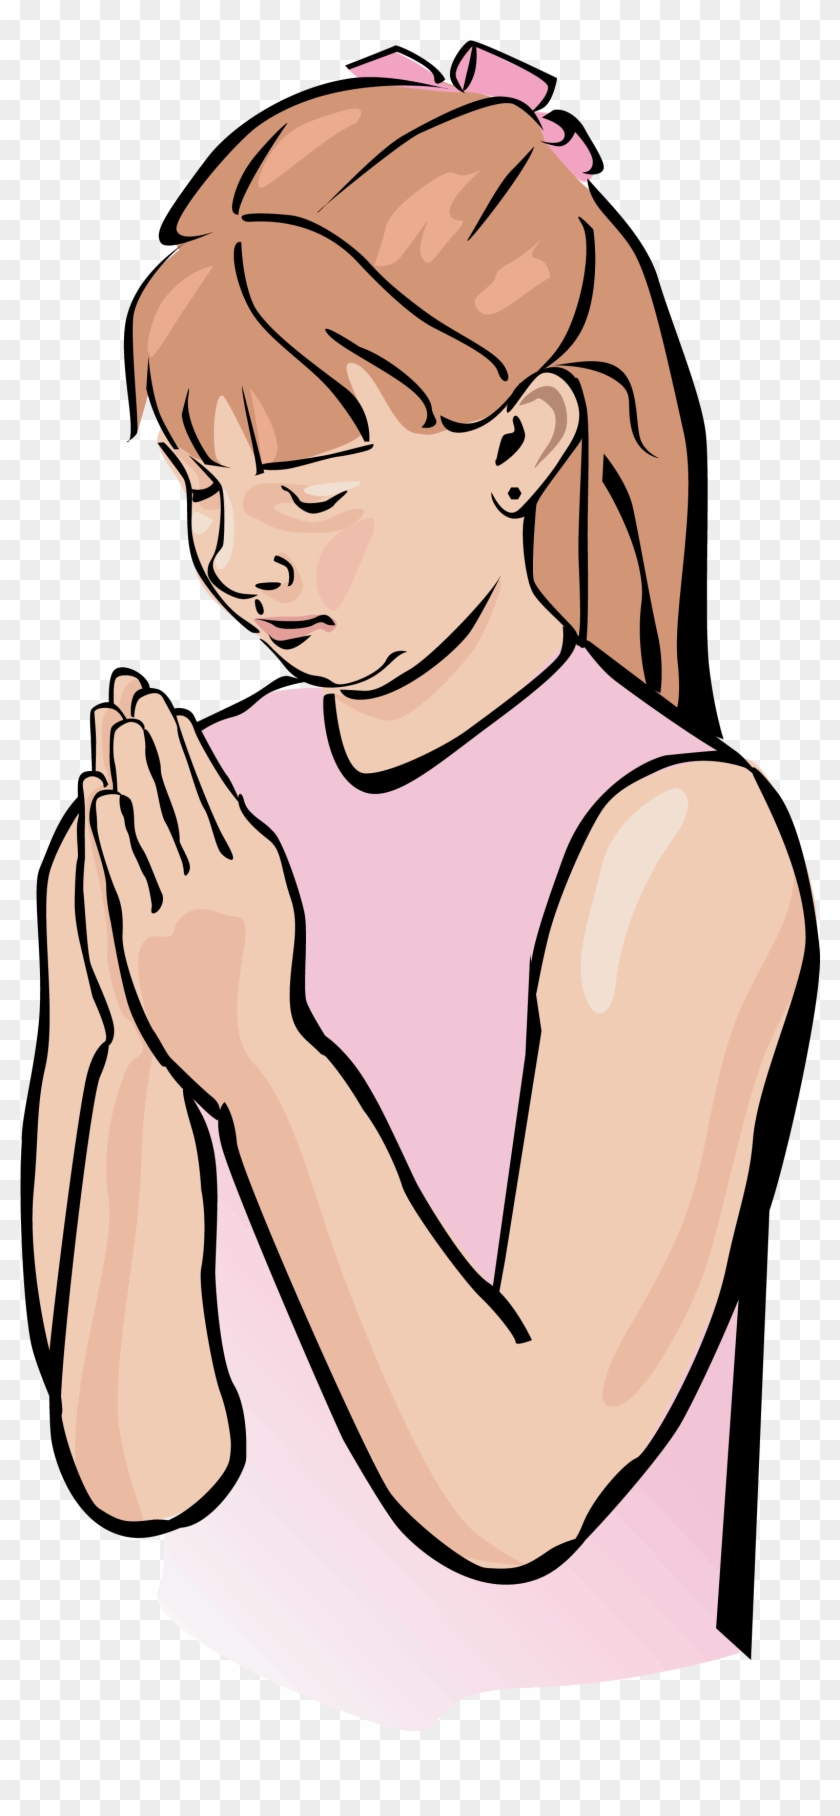 Child Prayer Clipart Free Clipart Images Psychic Full Size Png